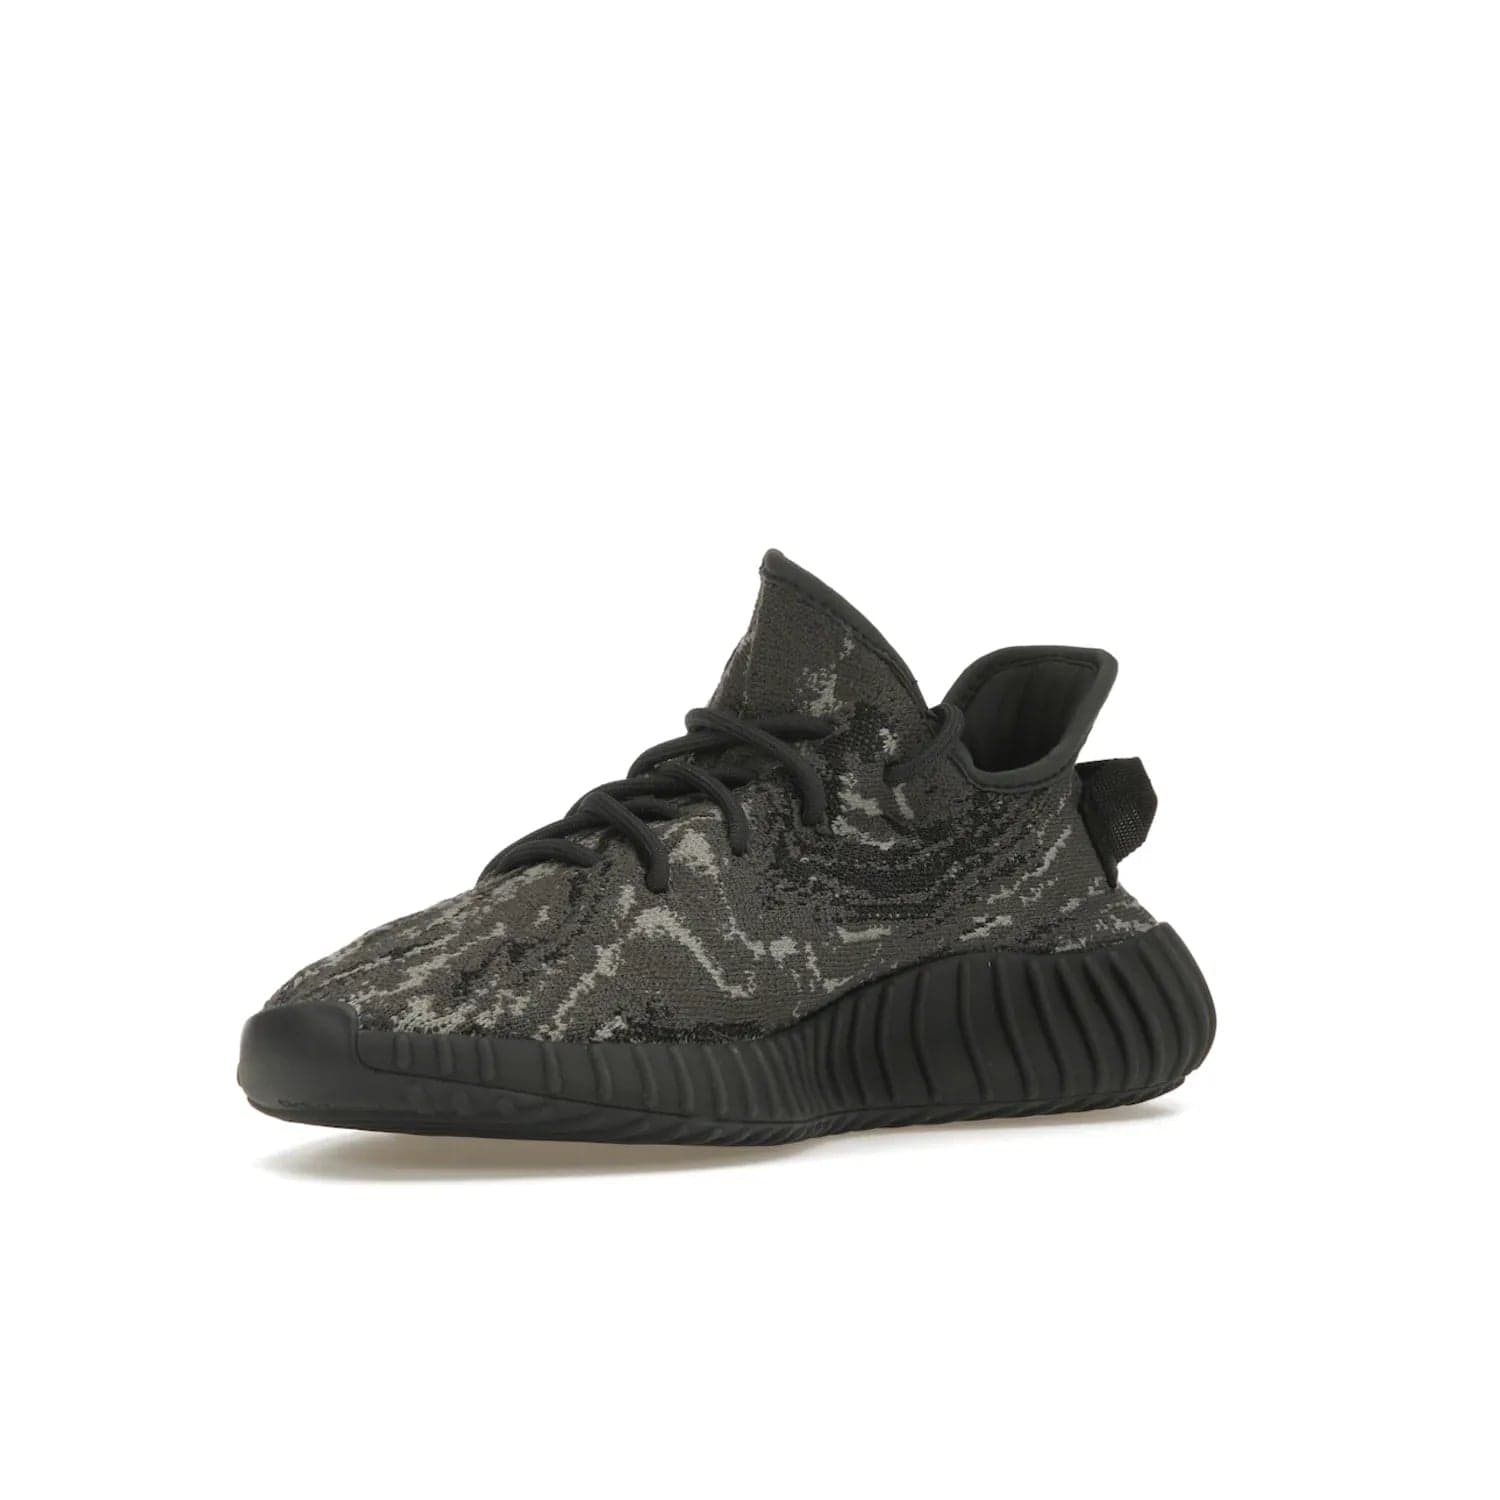 adidas Yeezy Boost 350 V2 MX Dark Salt - Image 15 - Only at www.BallersClubKickz.com - ##
The adidas Yeezy Boost 350 V2 MX Dark Salt offers a contemporary look with a signature combination of grey and black hues. Cushioned Boost midsole and side stripe allow for all day wear. Get the perfect fashion-forward addition with this sleek sneaker for $230.